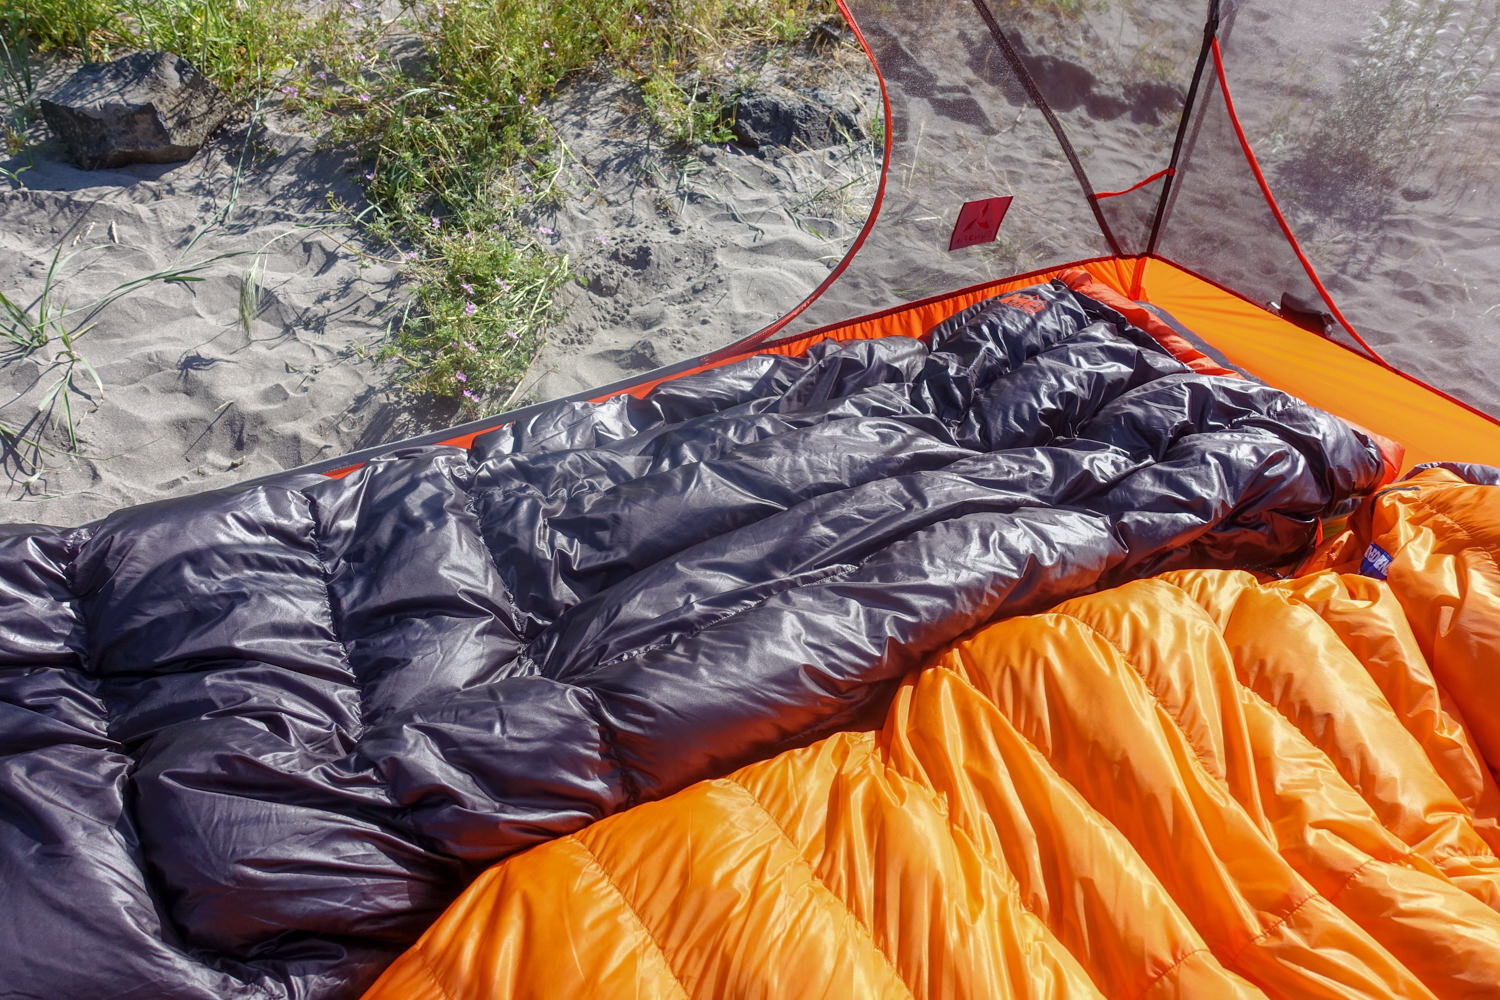 The REI Magma Trail Quilt 30 (left) is ultralight and super compact making it a great choice for summer backpacking.